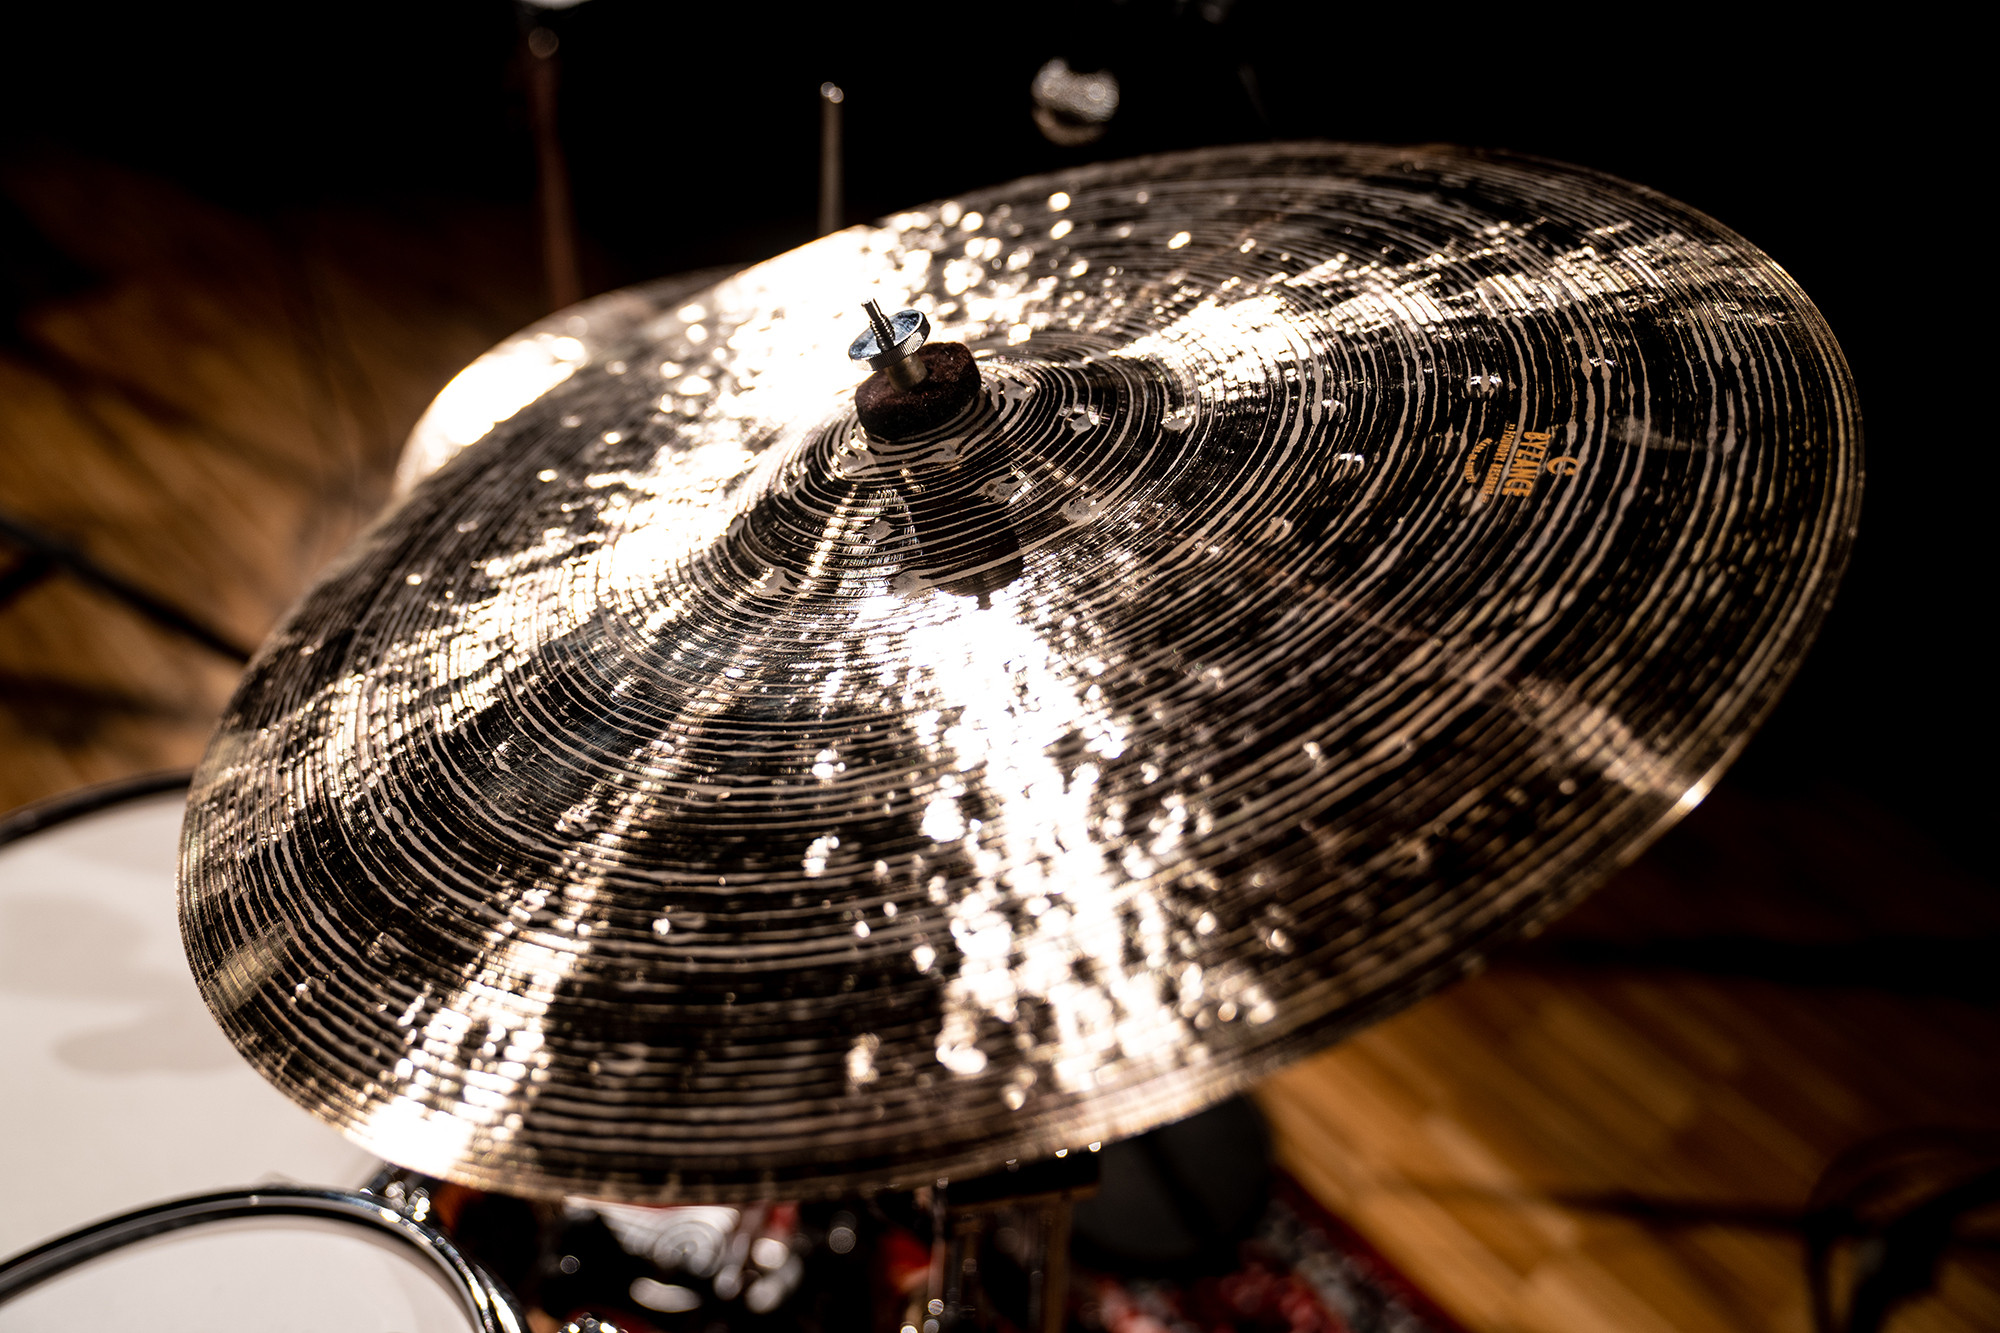 MEINL Cymbals マイネル Byzance Foundry Reserve Series クラッシュシンバル